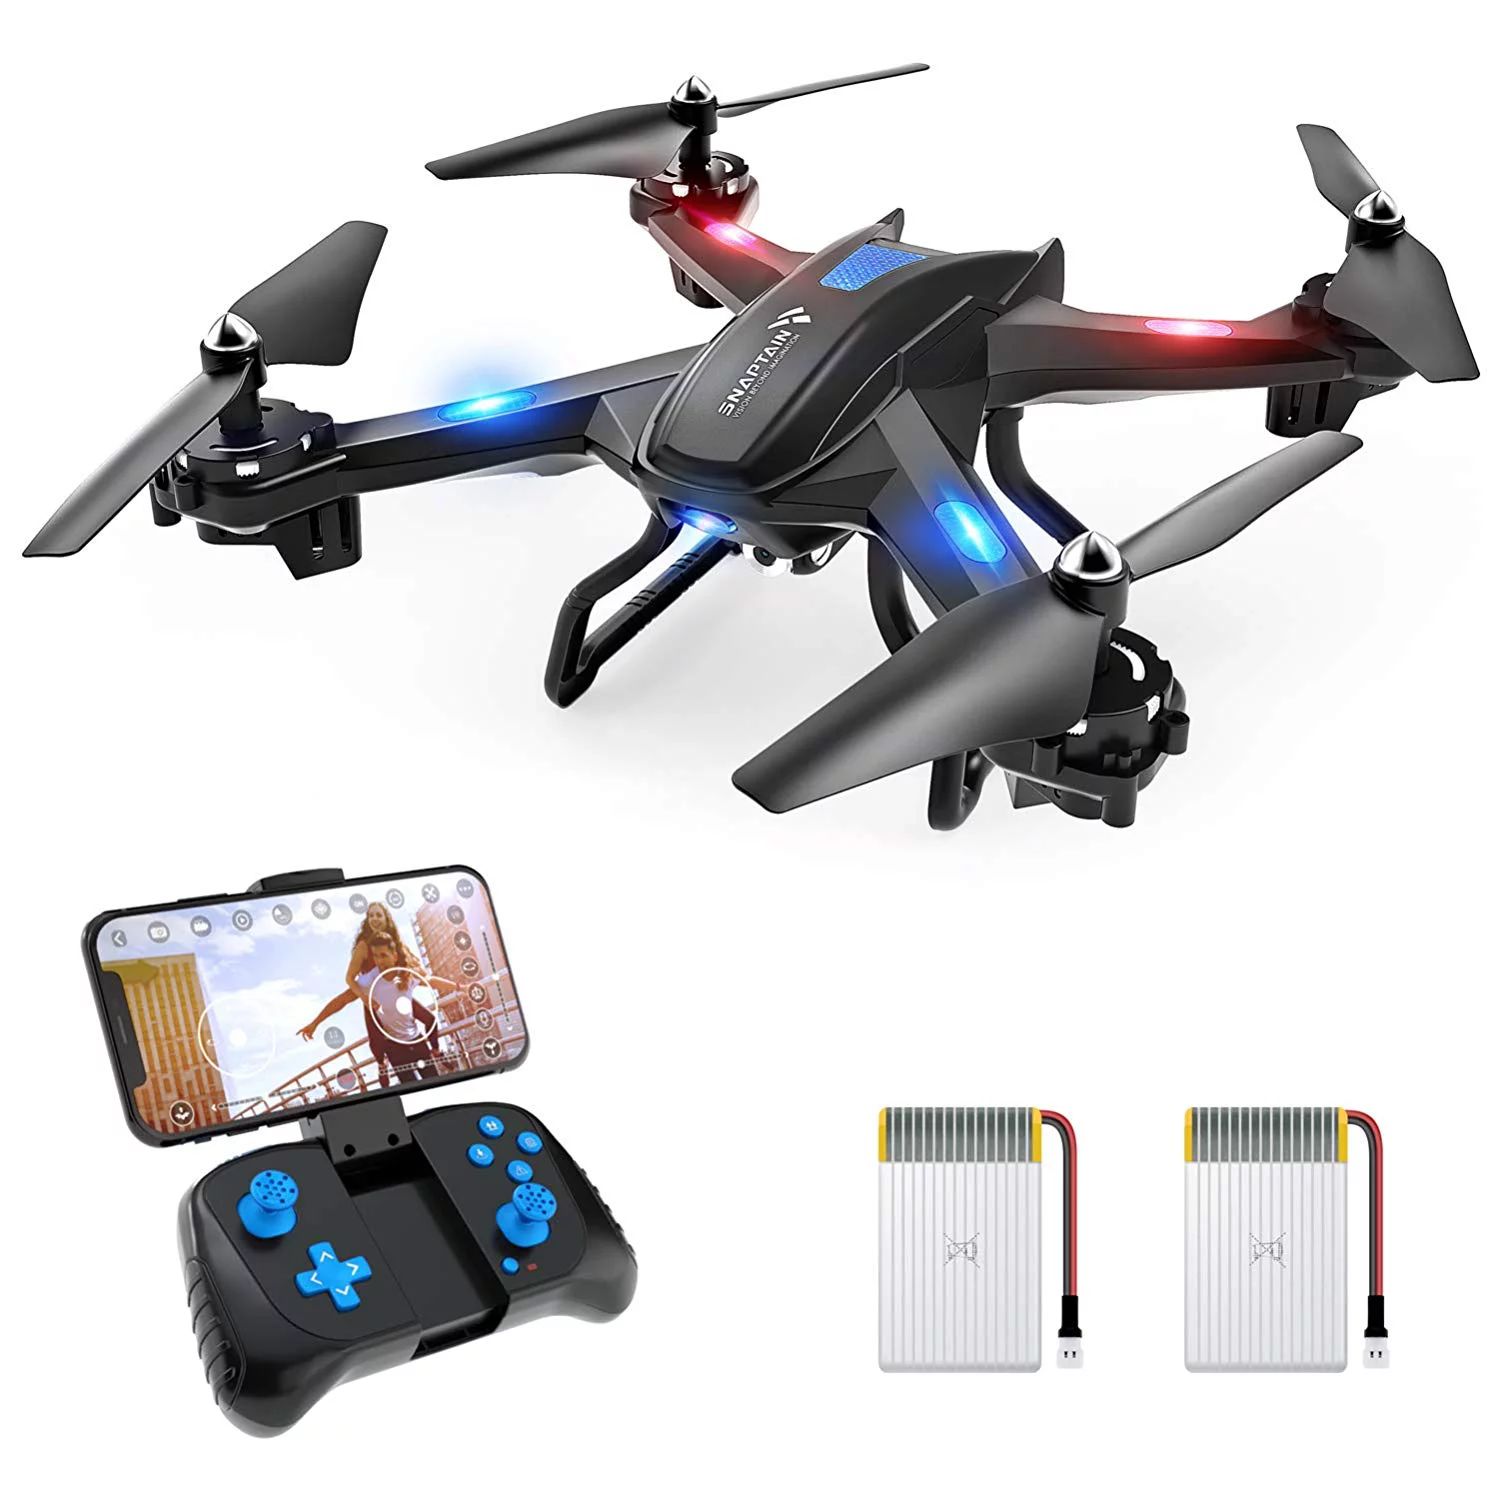 SNAPTAIN S5C-720P WiFi FPV Drone with 720P HD Camera, Voice/Gesture Control,  RC Quadcopter for B... | Walmart (US)